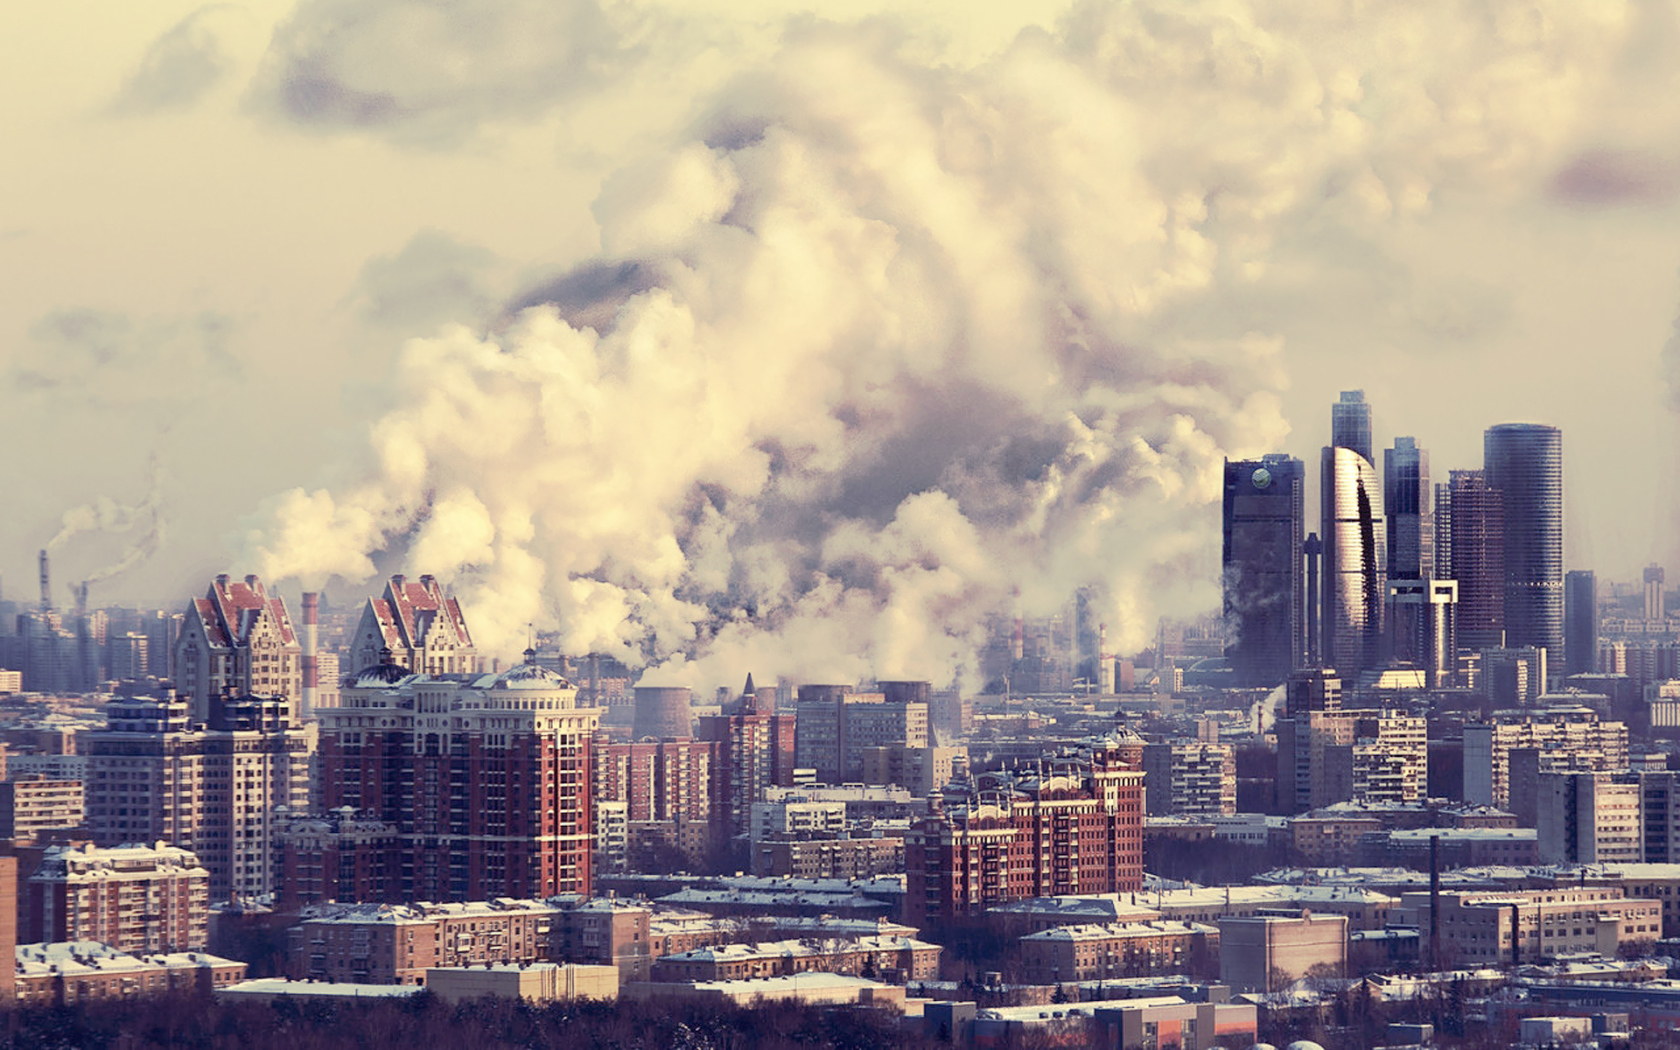 The Moscow under the white smoke